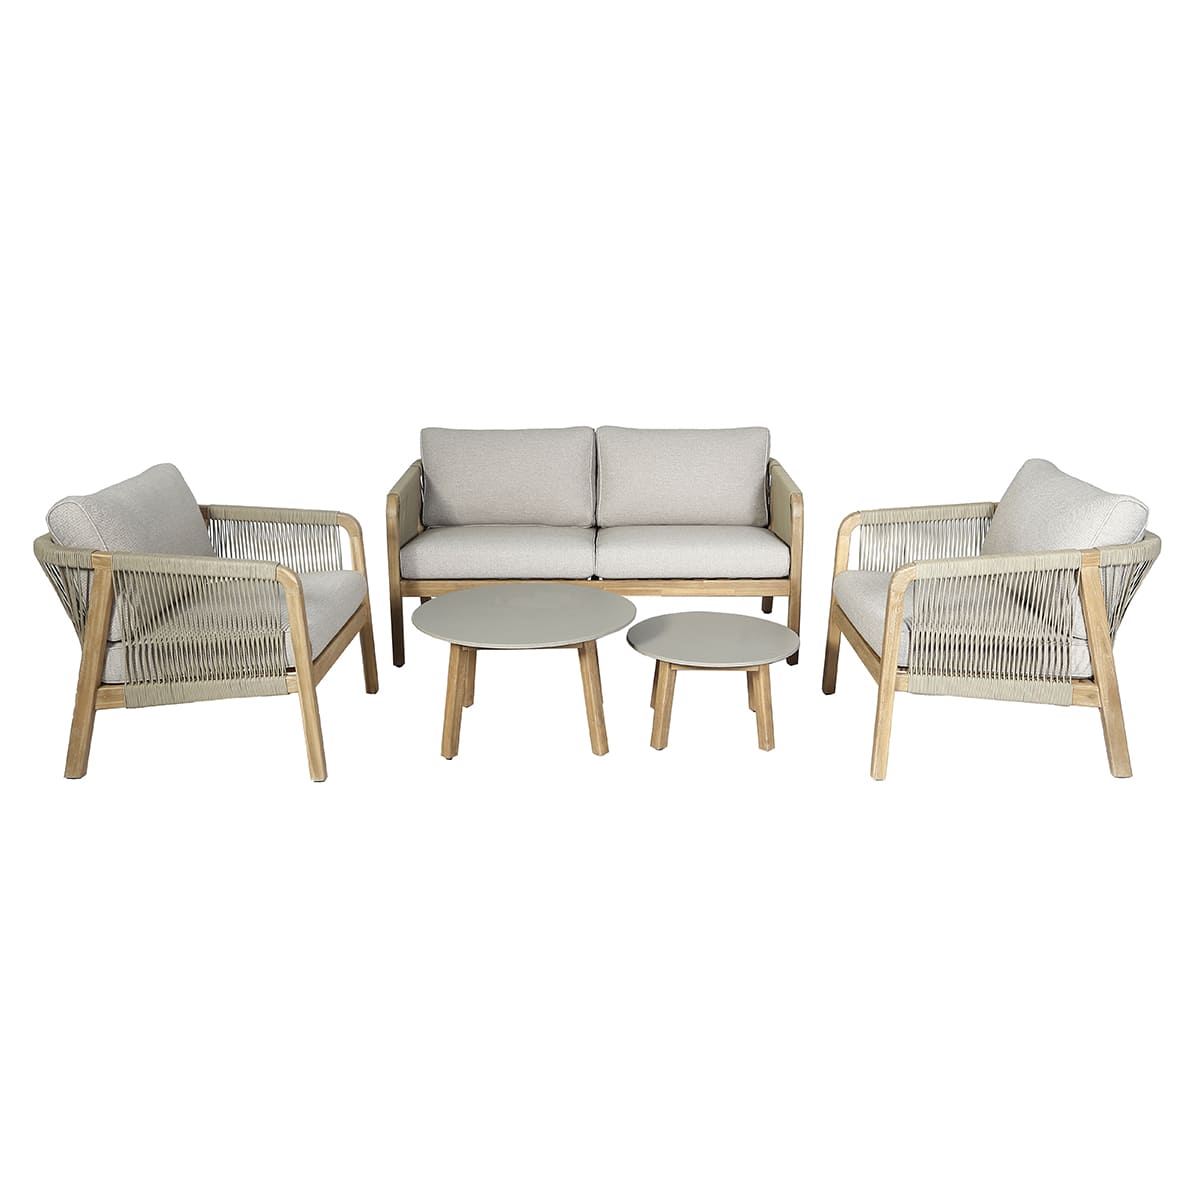 Maze Outdoor Martinique Rope Weave Sofa Set In Acacia Rope 2 Seater